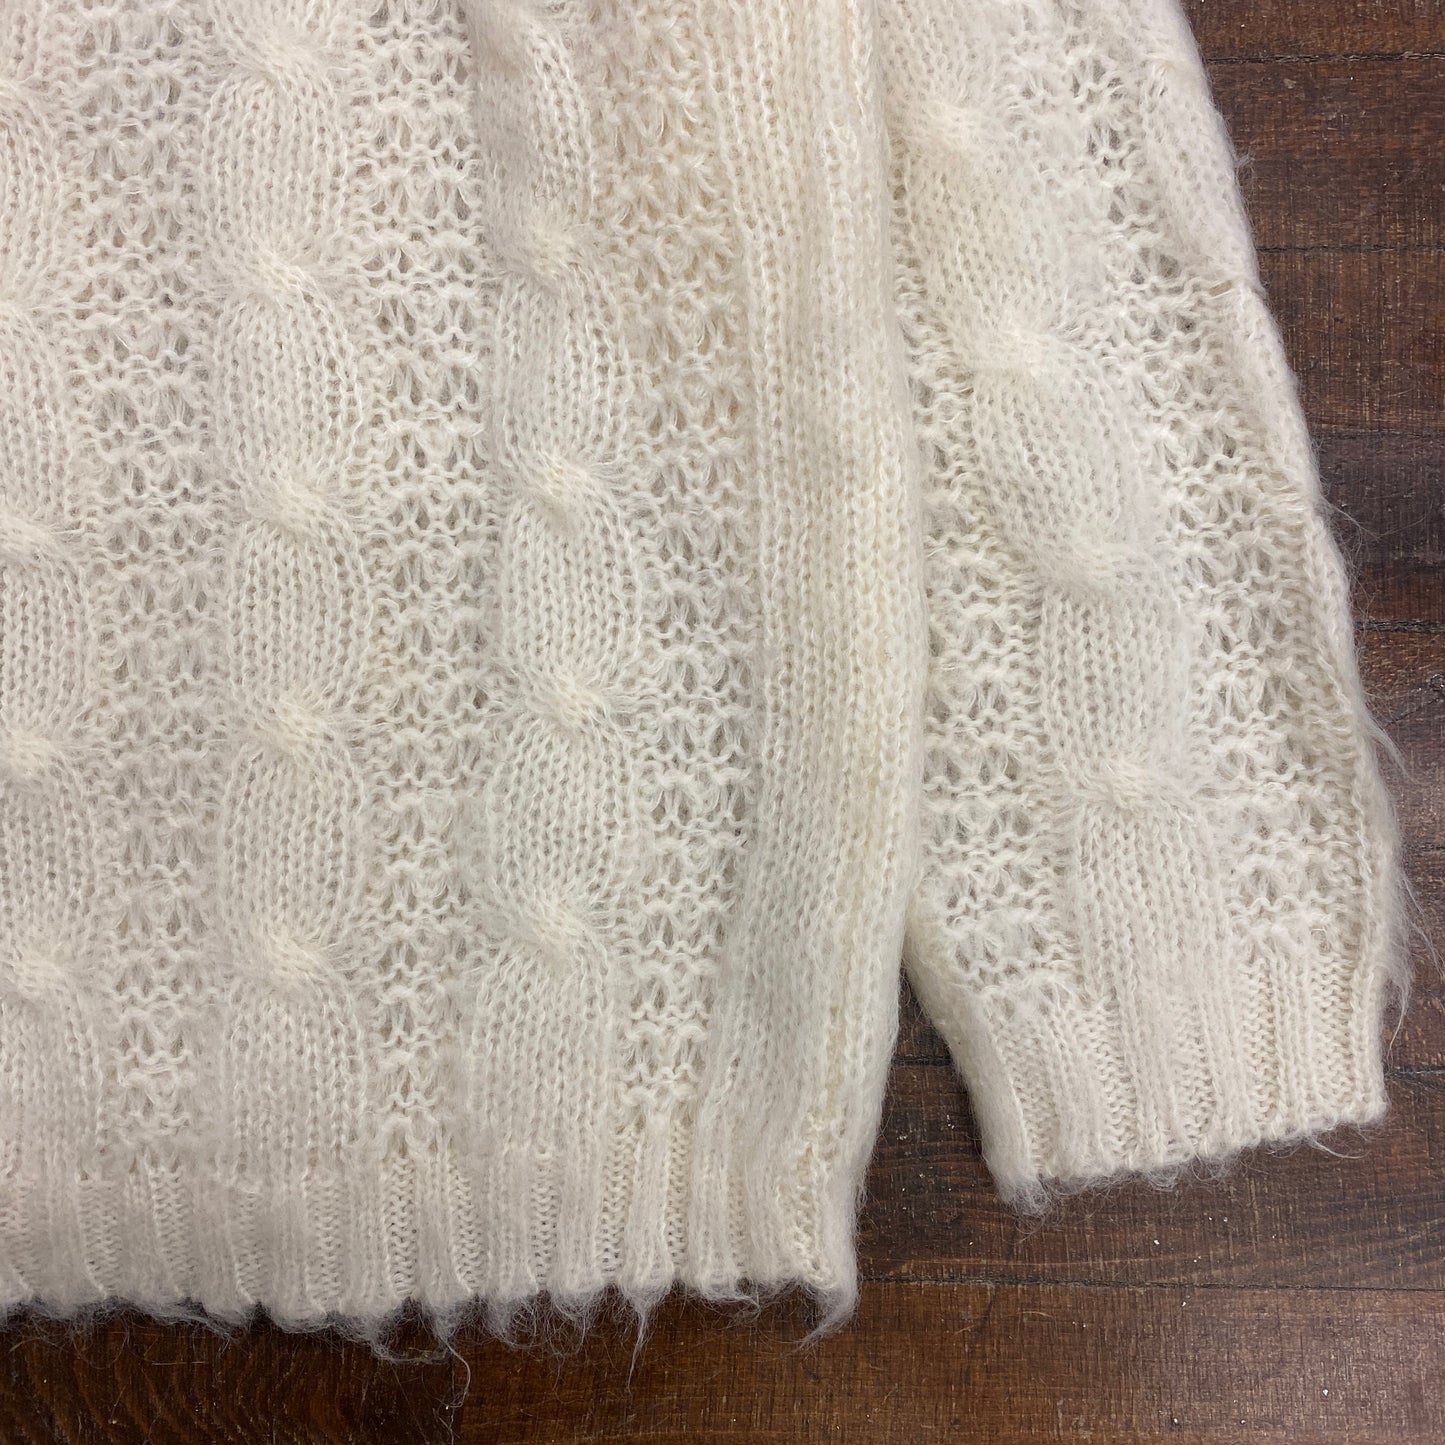 70s Banff LTD White Mohair Cable Knit Sweater - Size Medium